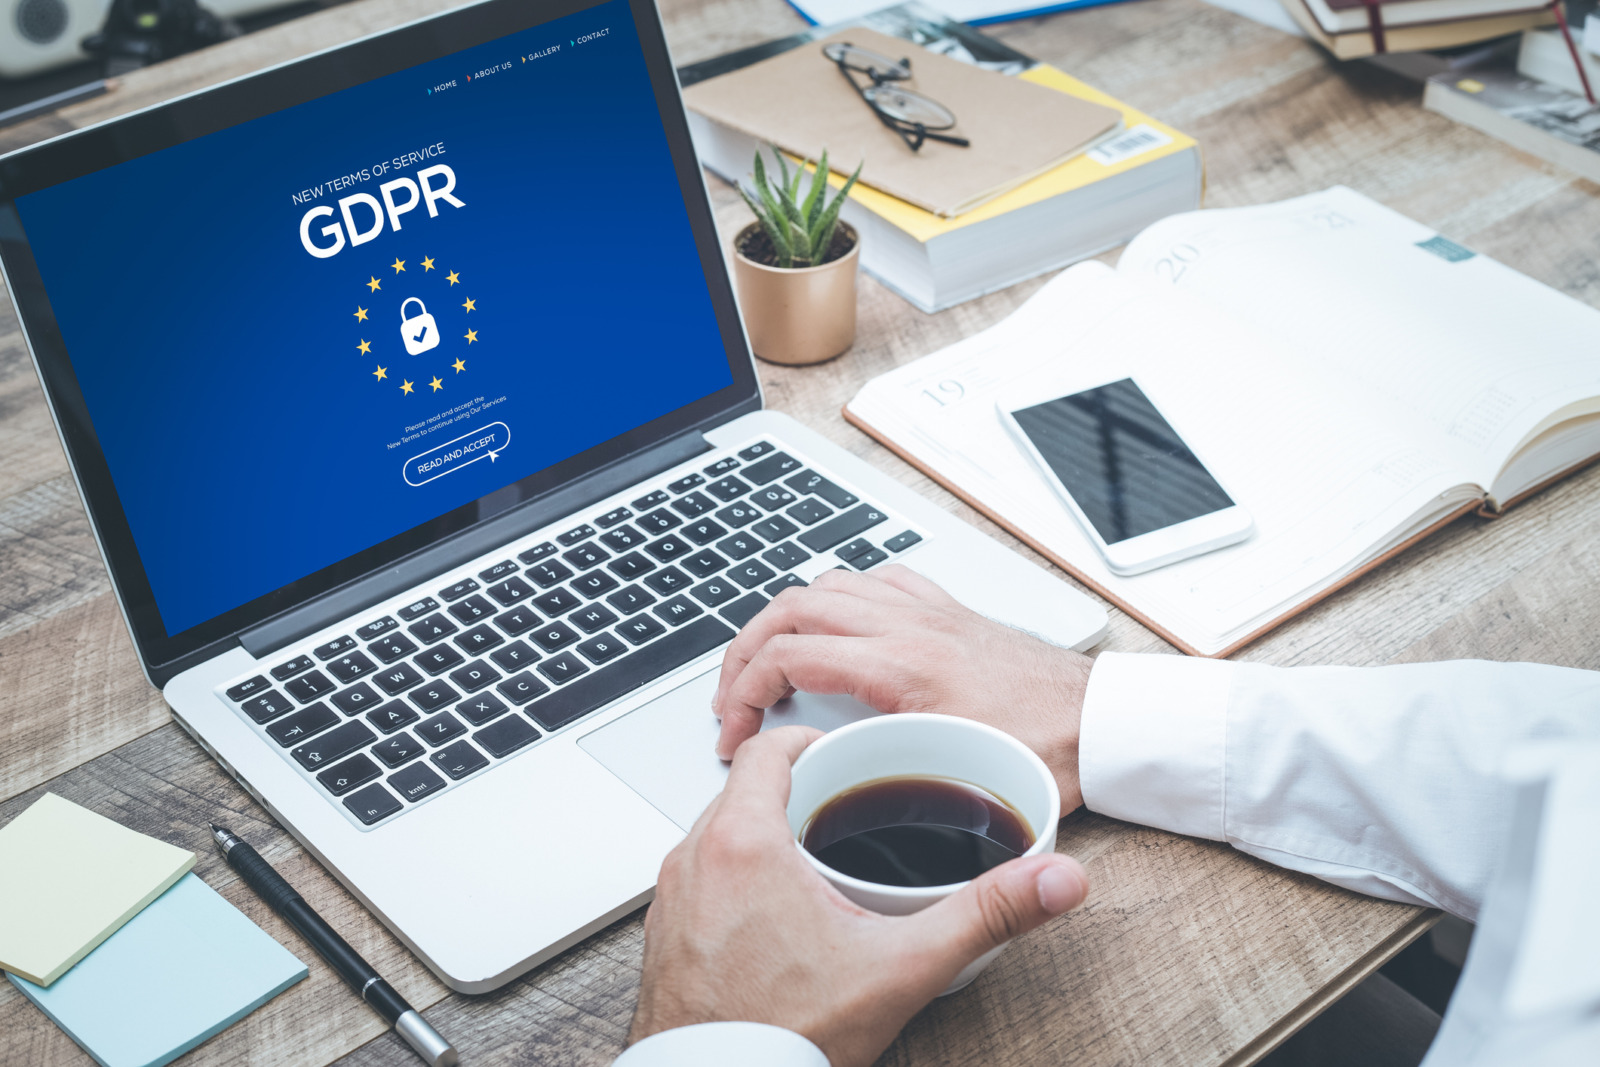 JazzHR & GDPR: What You Need to Know